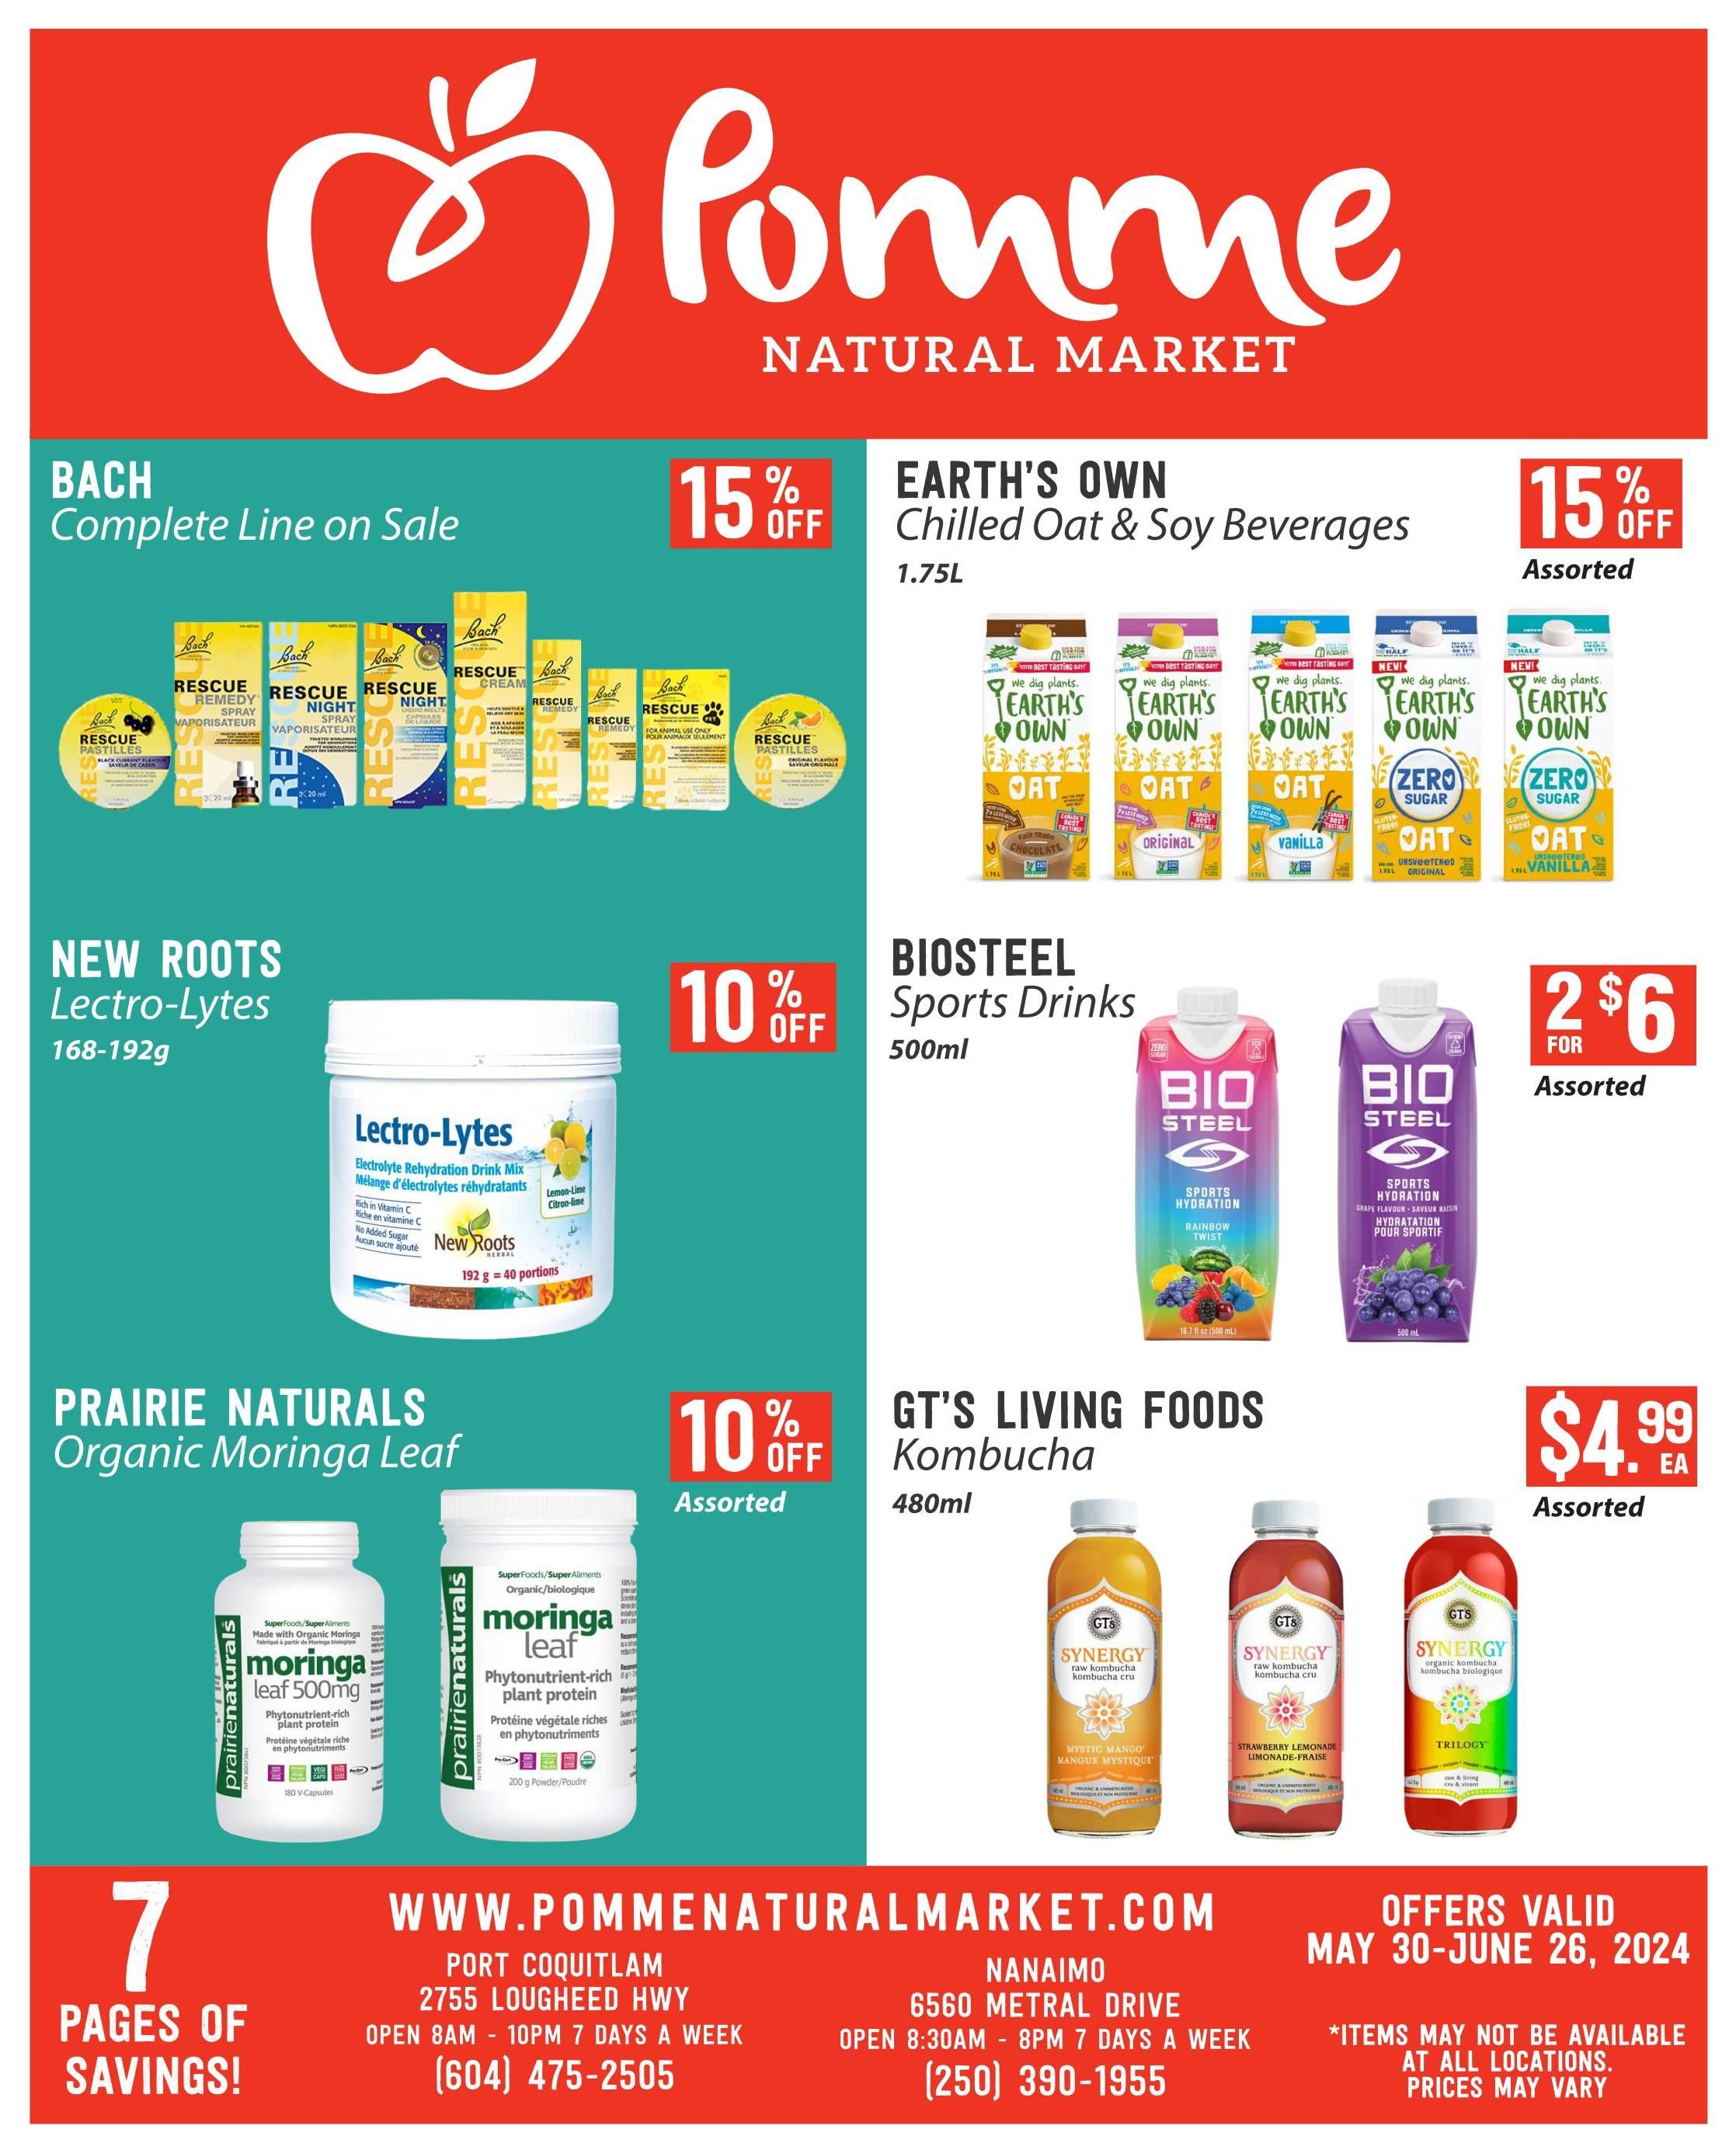 Pomme Natural Market - Monthly Specials